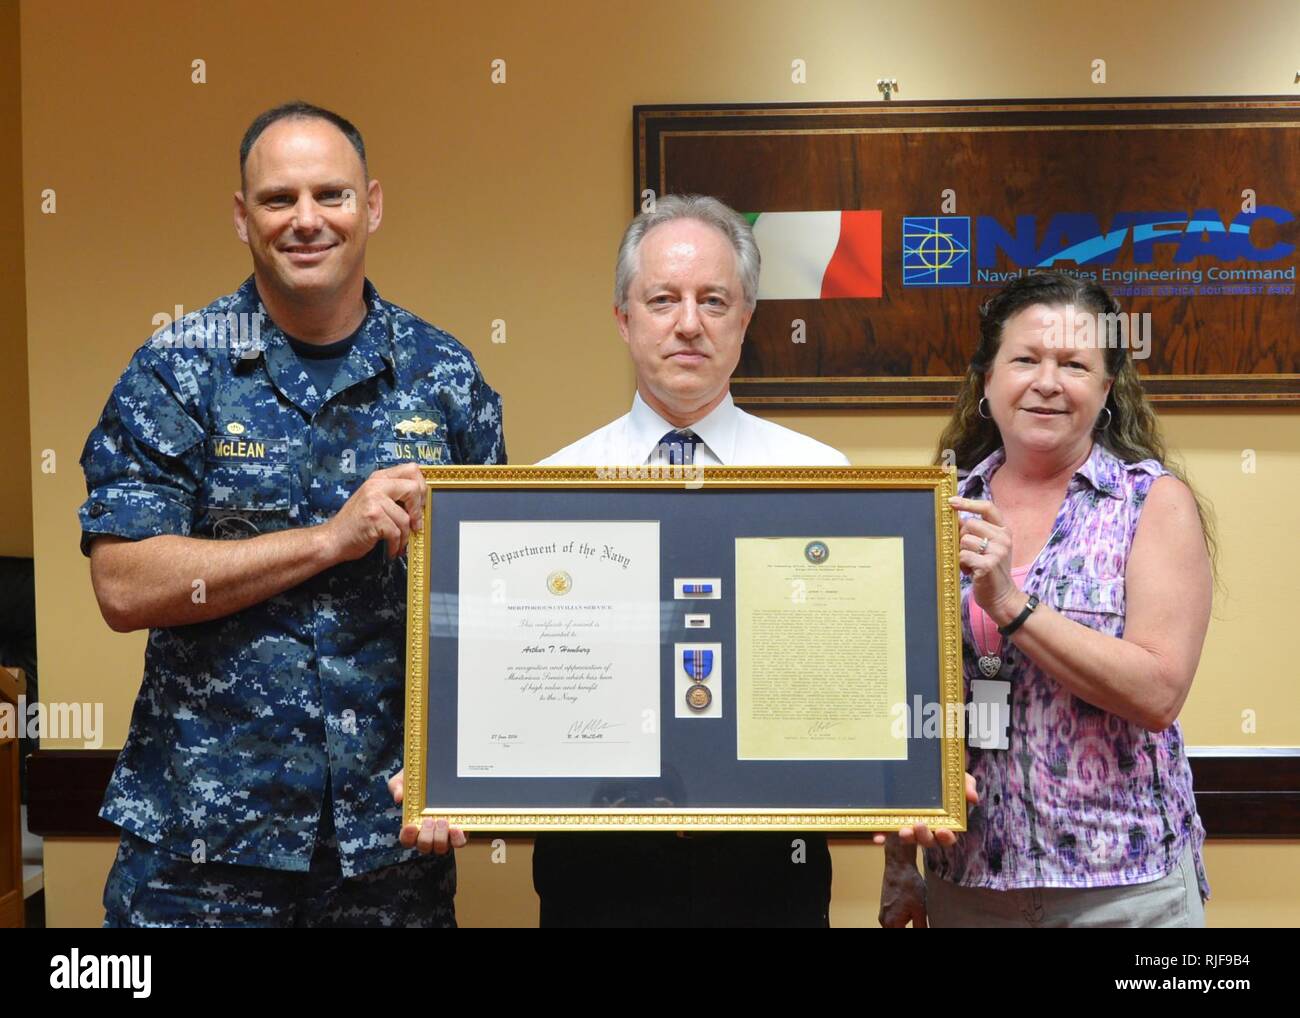 Naval Facilities Engineering Command (NAVFAC) Europe Africa Southwest Asia (EURAFSWA) Commanding Officer Capt. Bob McLean (left) and Laura Haverlock (right), Acquisitions business line coordinator, present Arthur T. Homburg, NAVFAC EURAFSWA senior contracting officer and supervisory contracting specialist, with the Navy Meritorious Civilian Service Award July 1, 2014. During Homburg's six years with NAVFAC EURAFSWA, he was directly responsible for timely acquisition planning and awarding of more than 267 contract actions worth more than $522 million, to include assisting Public Works Departmen Stock Photo